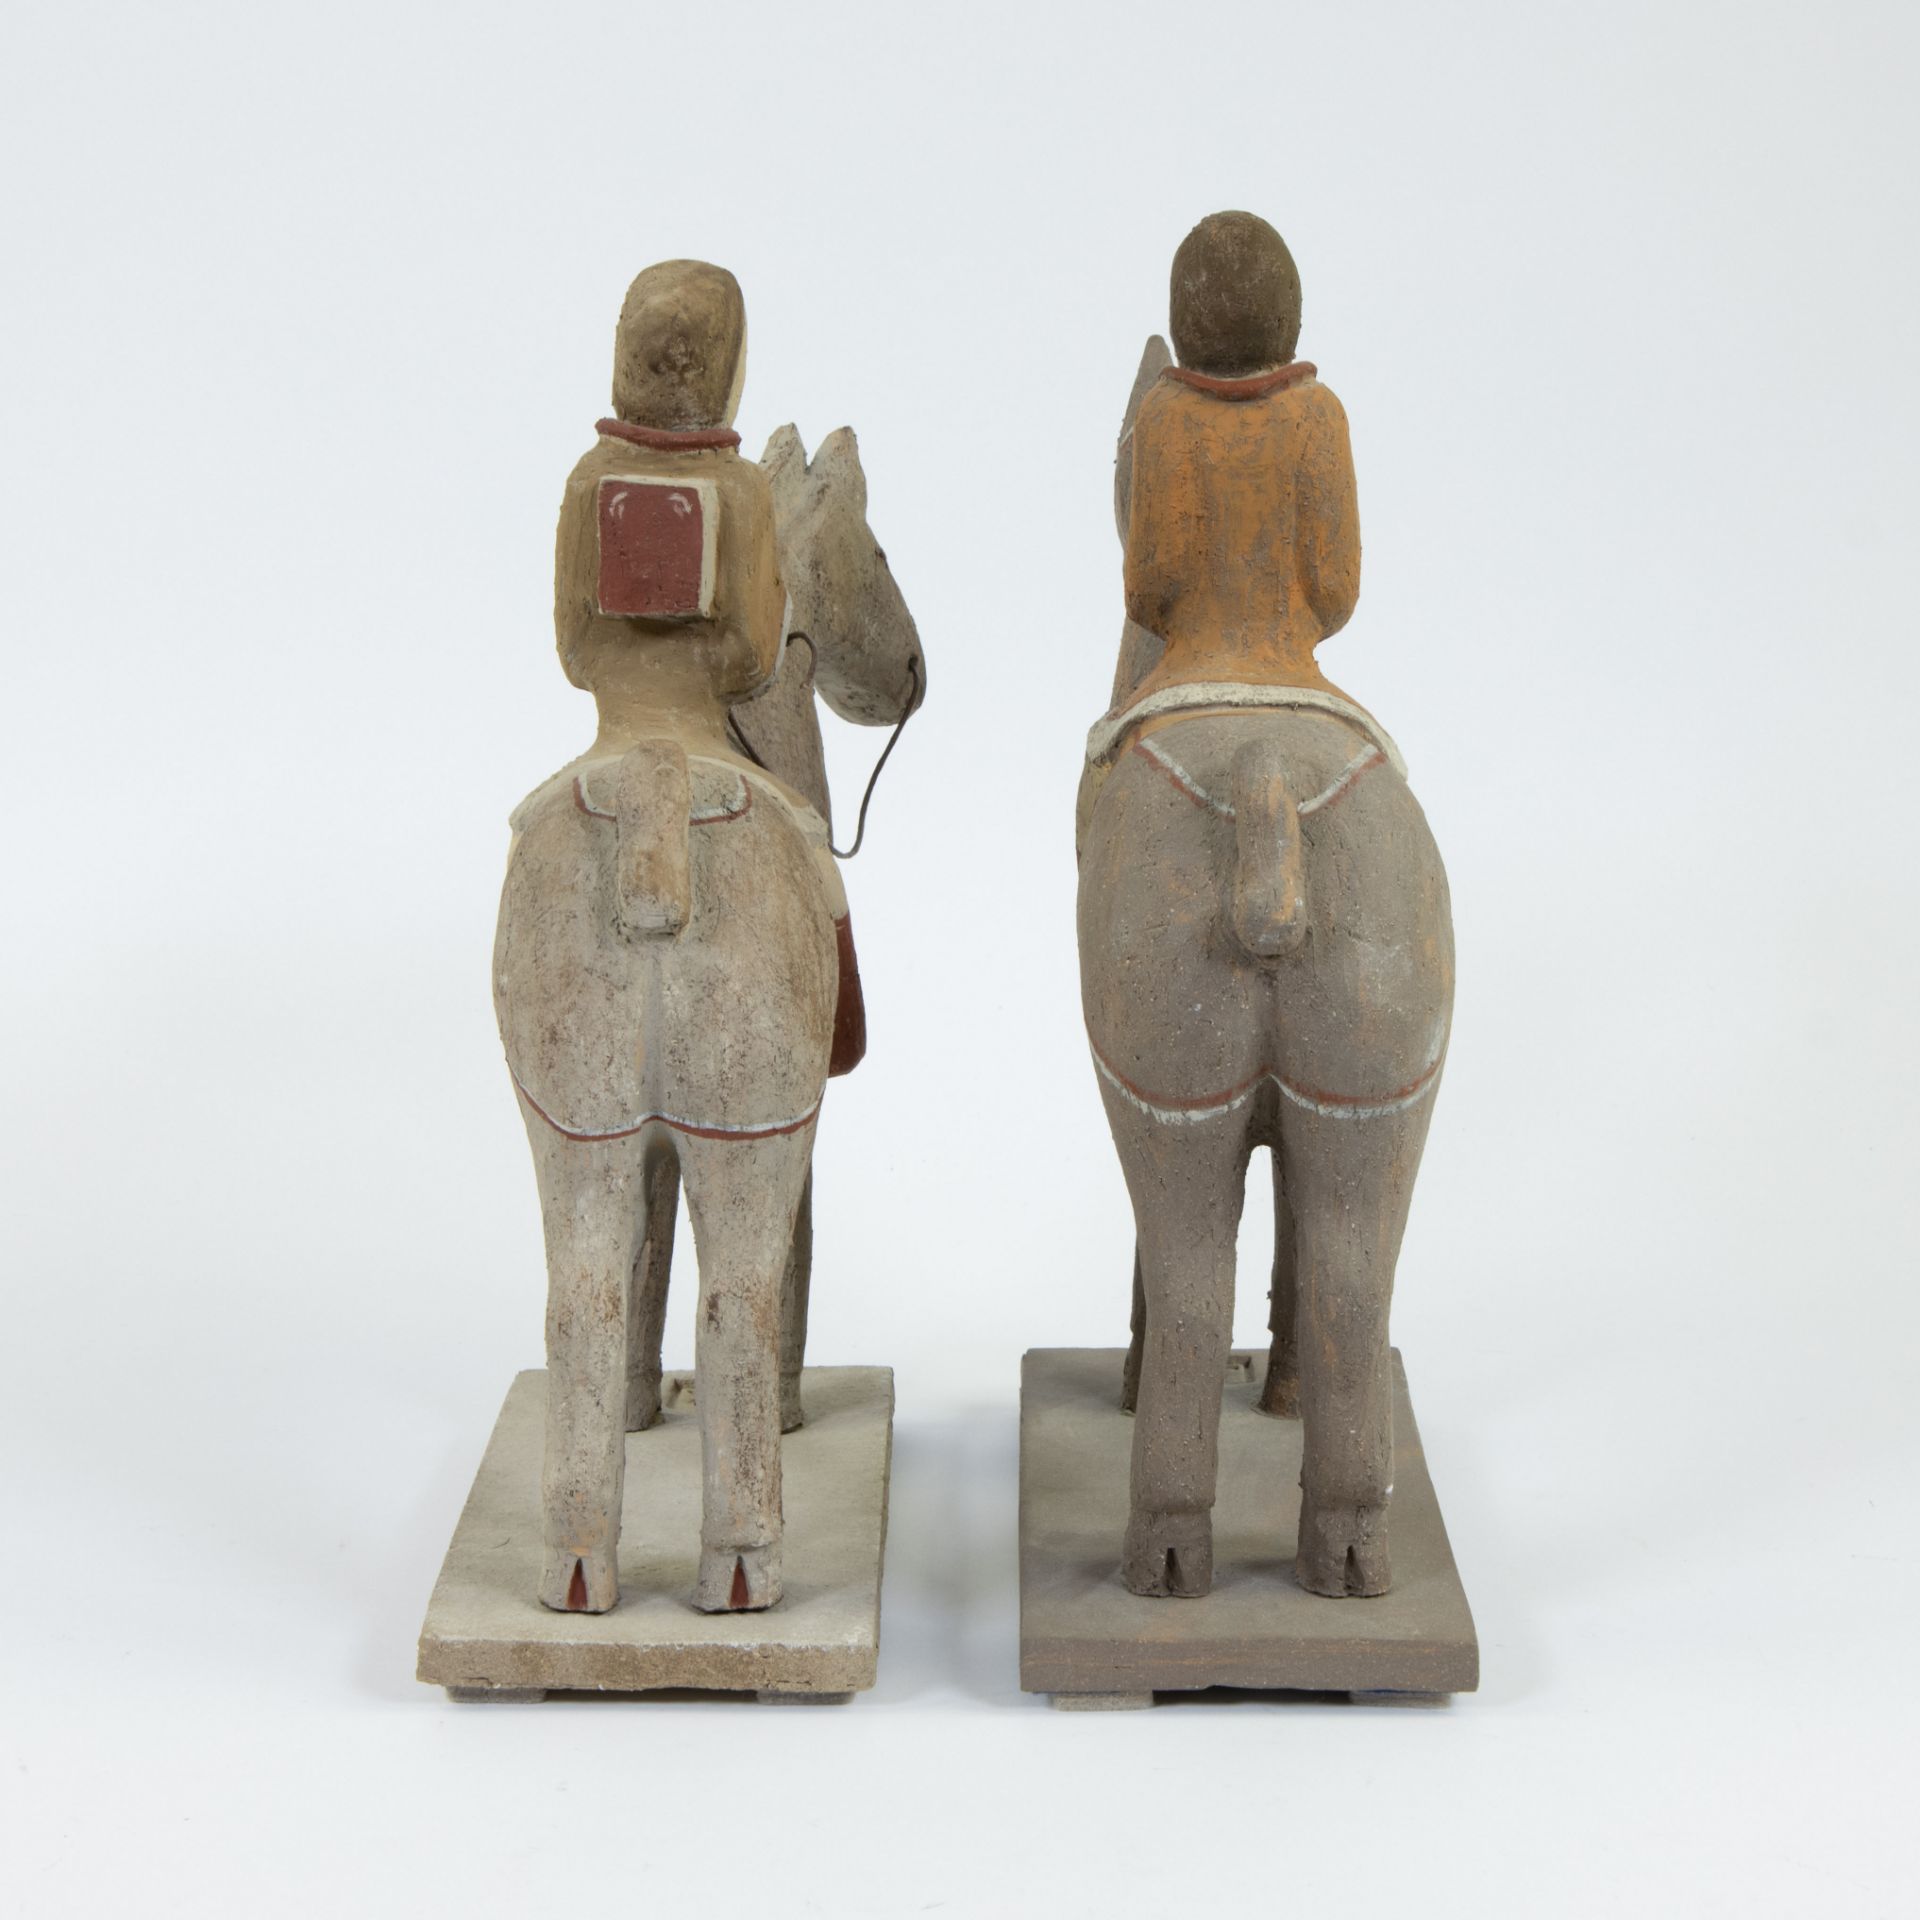 Collection of 2 terracotta horses with rider, contemporary, marked DK - Image 3 of 6